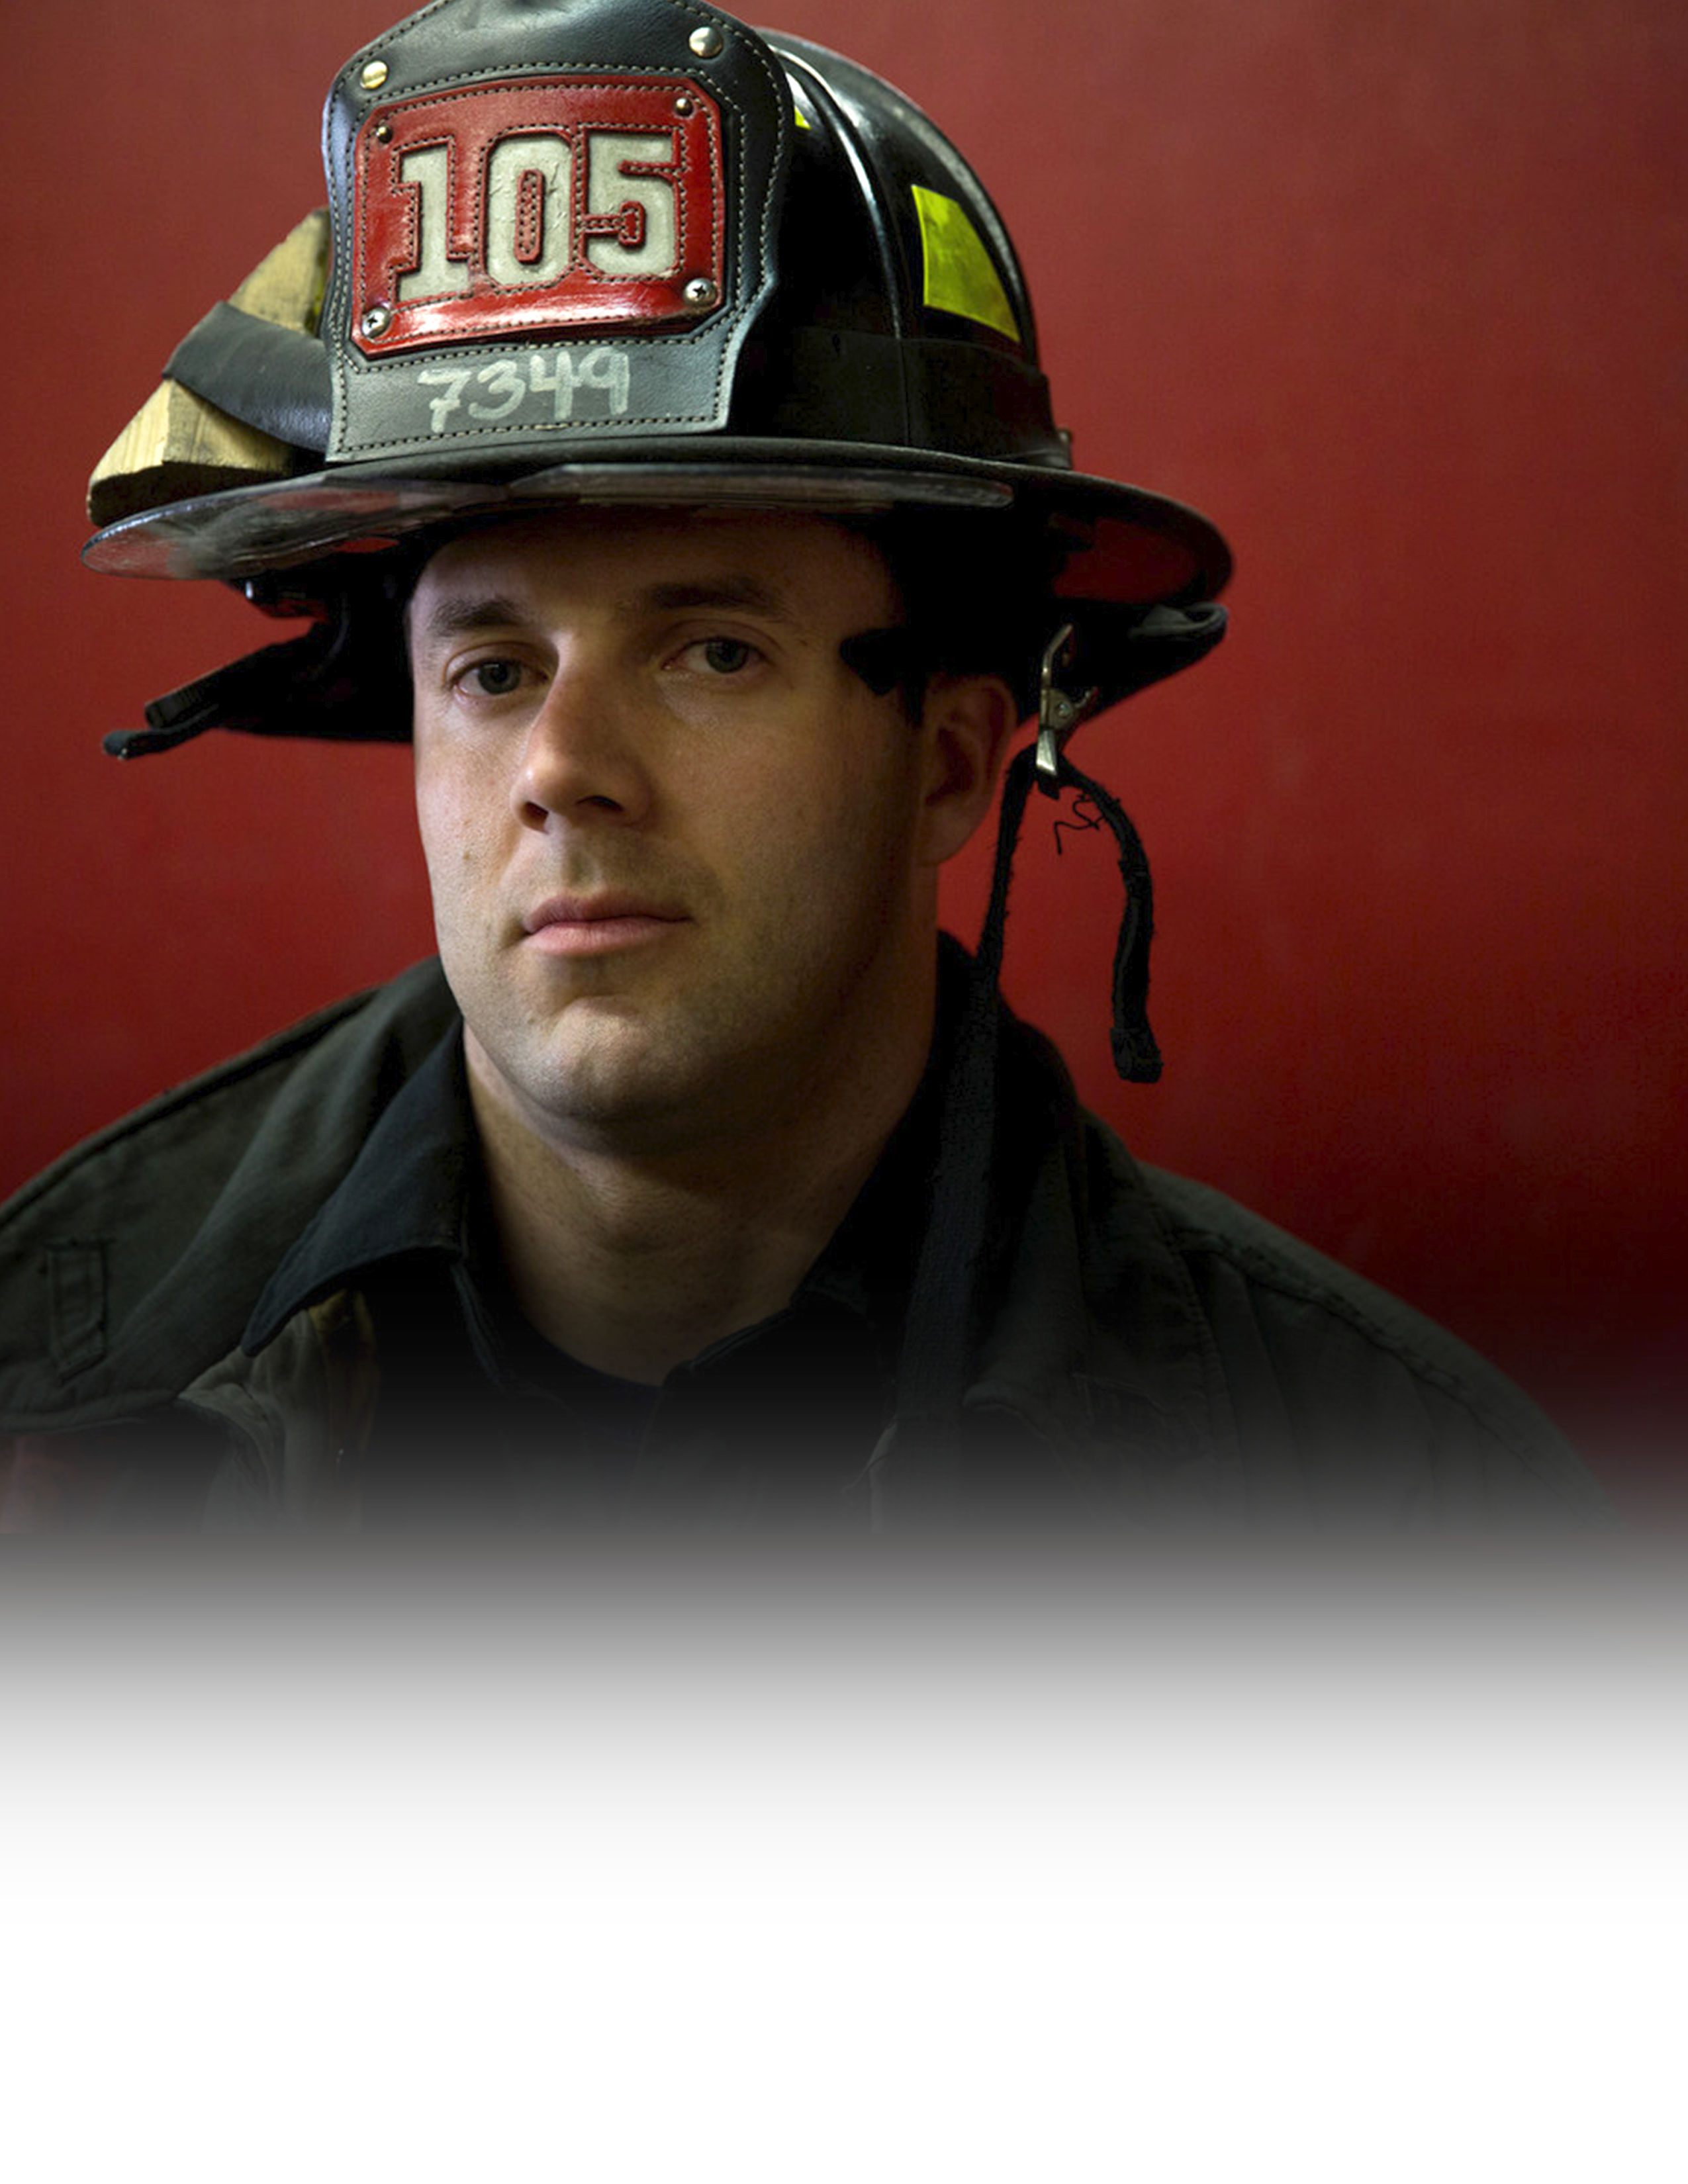 FDNY Firefighter Crowley.